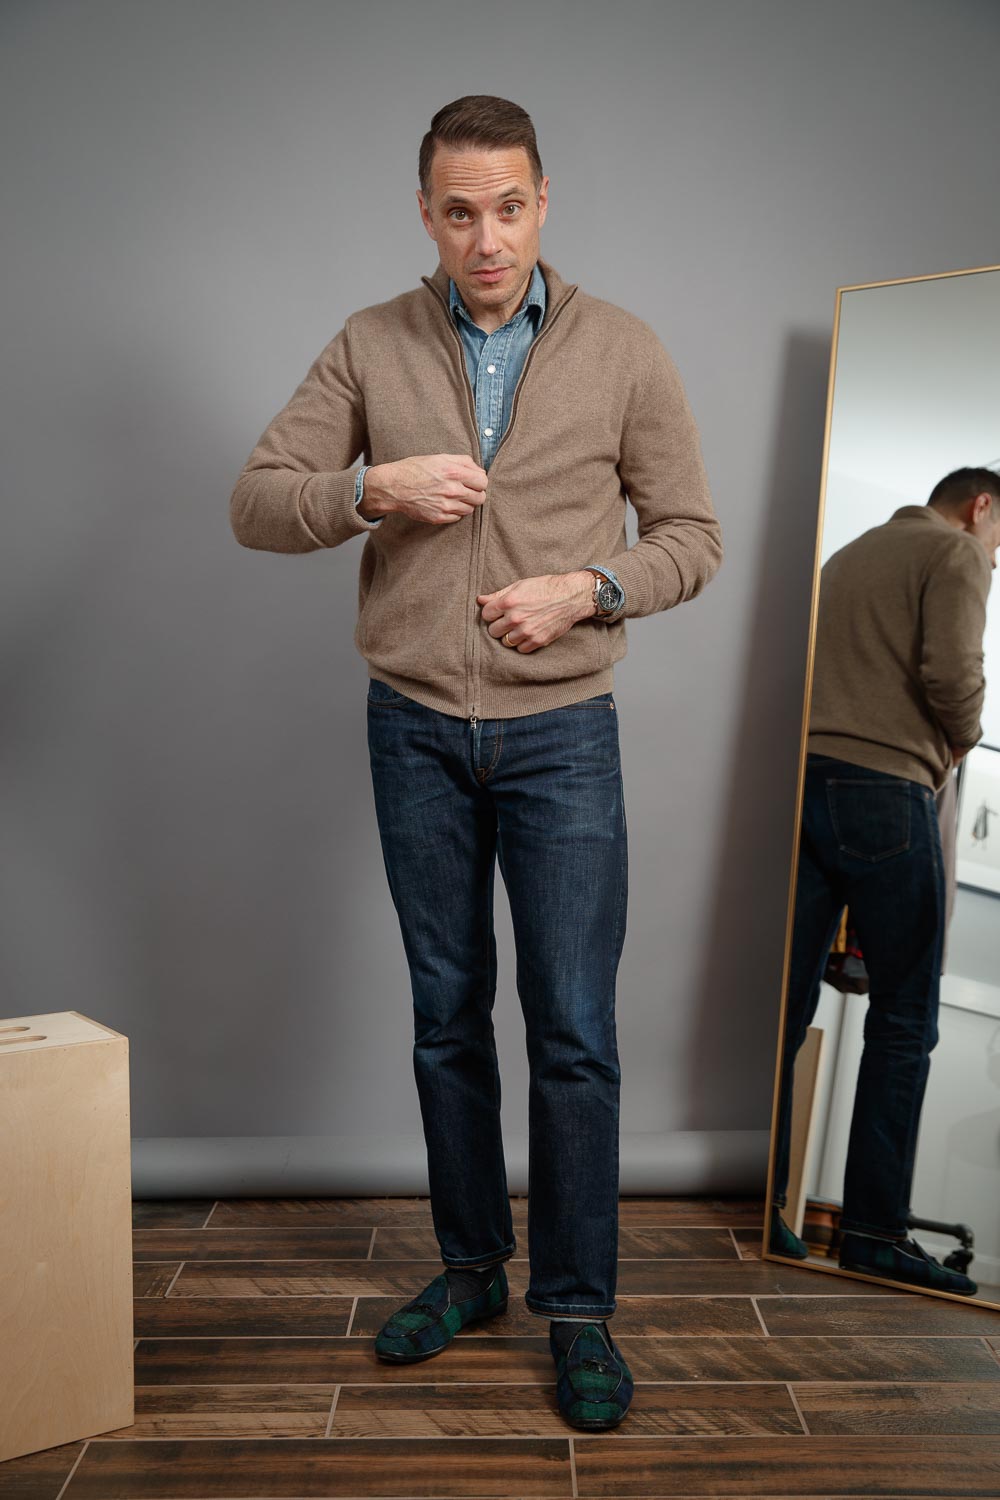 raw-denim-tan-cashmere-sweater-blackwatch-plaid-belgian-shoes-omega-speedmaster-casual-winter-outfit-for-men